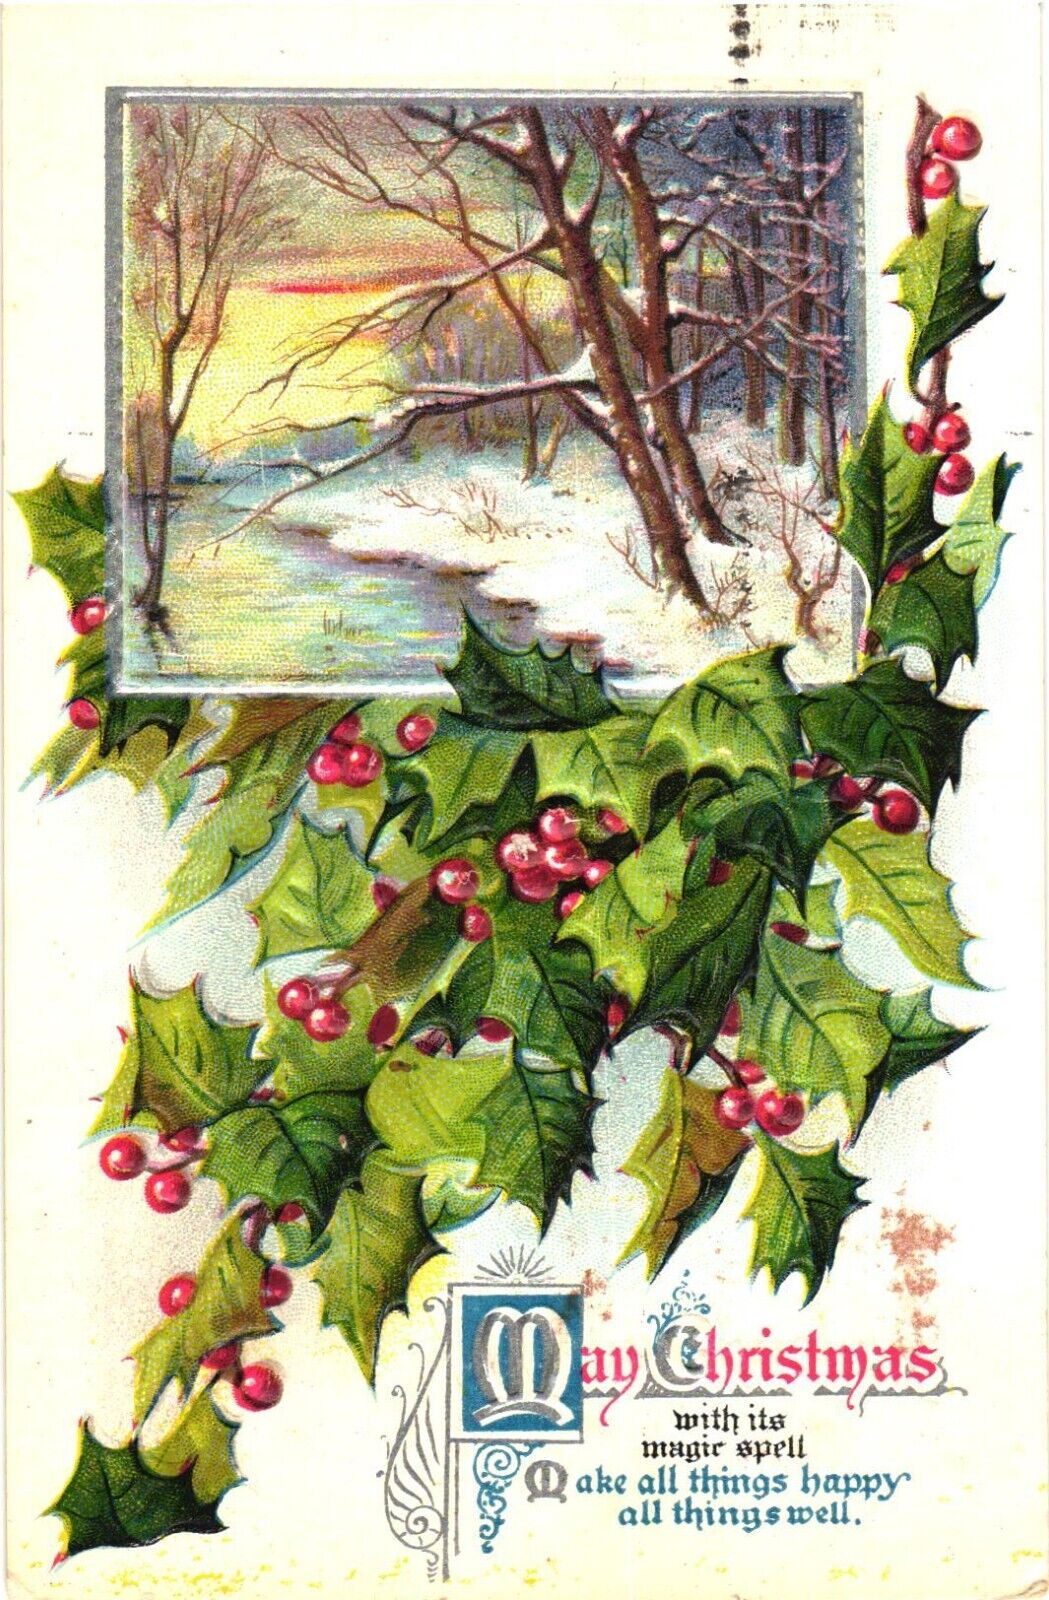 Lake In Winter, May Christmas, Make All Things Happy All Things Well Postcard